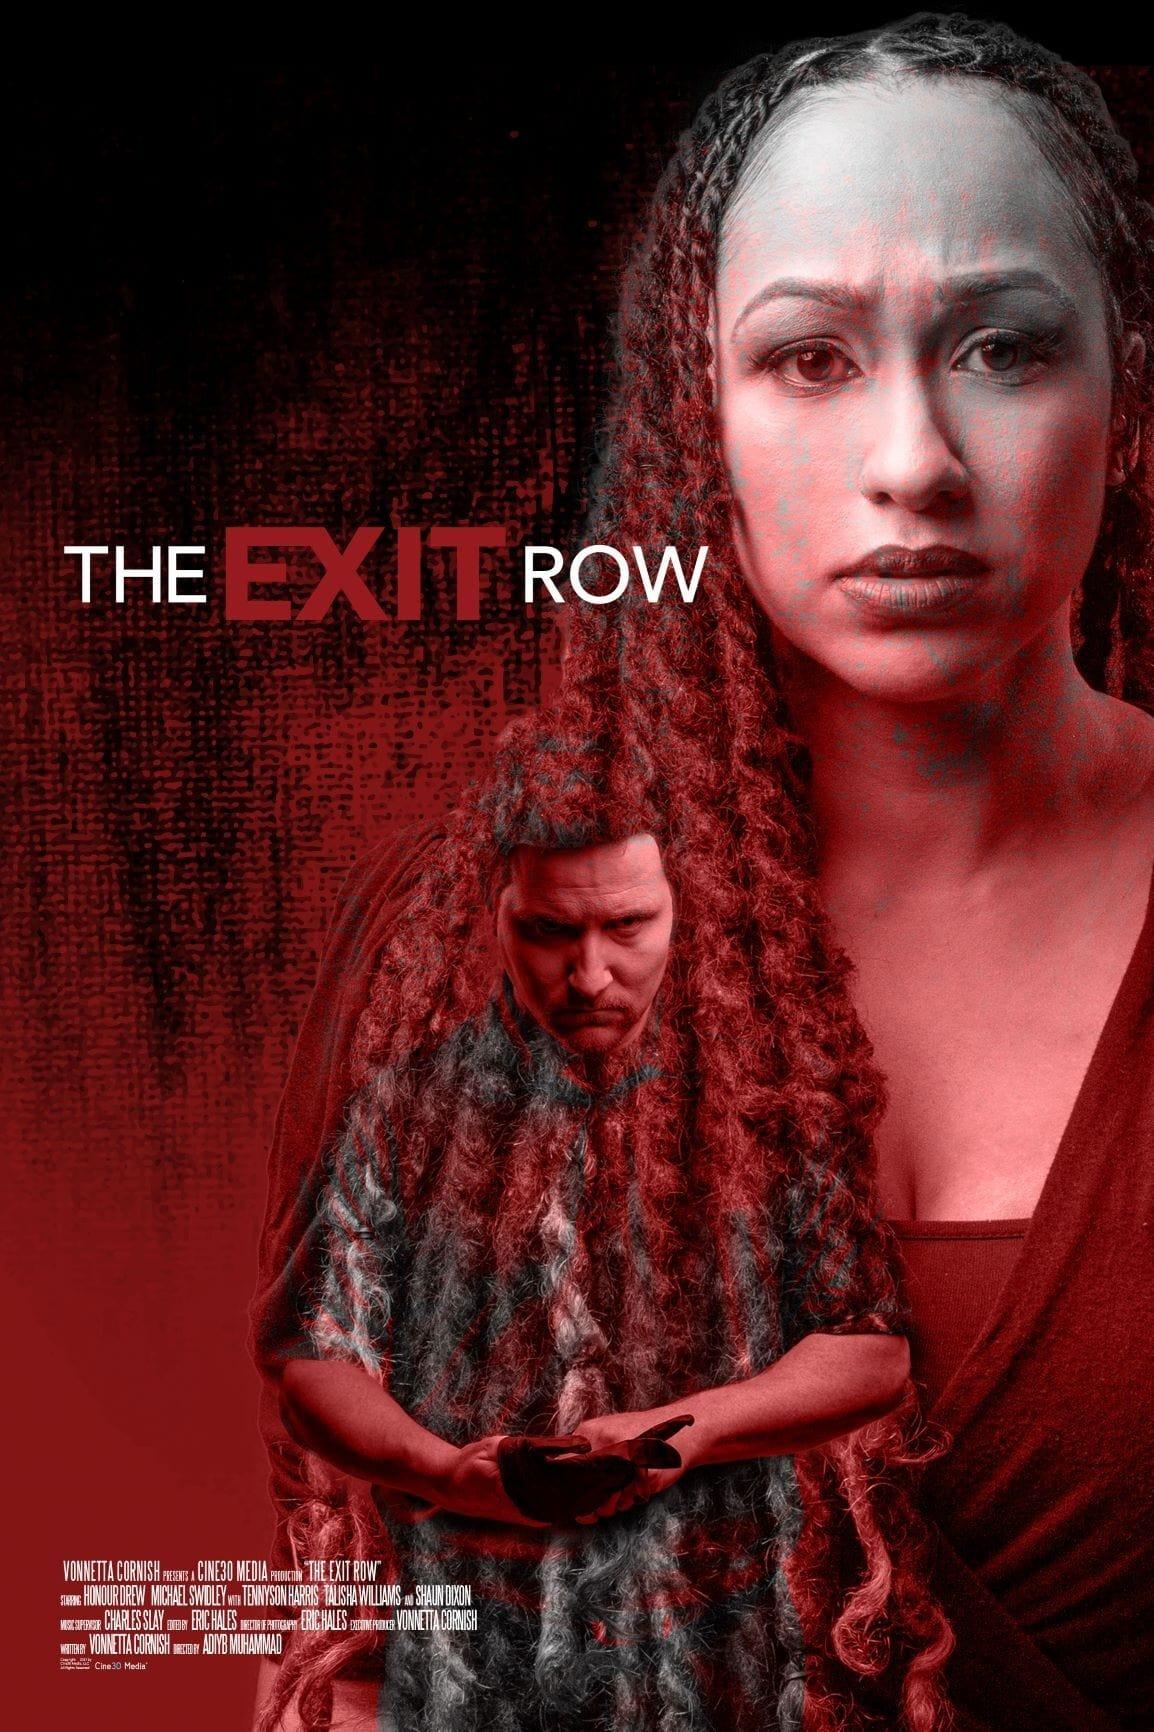 The Exit Row poster